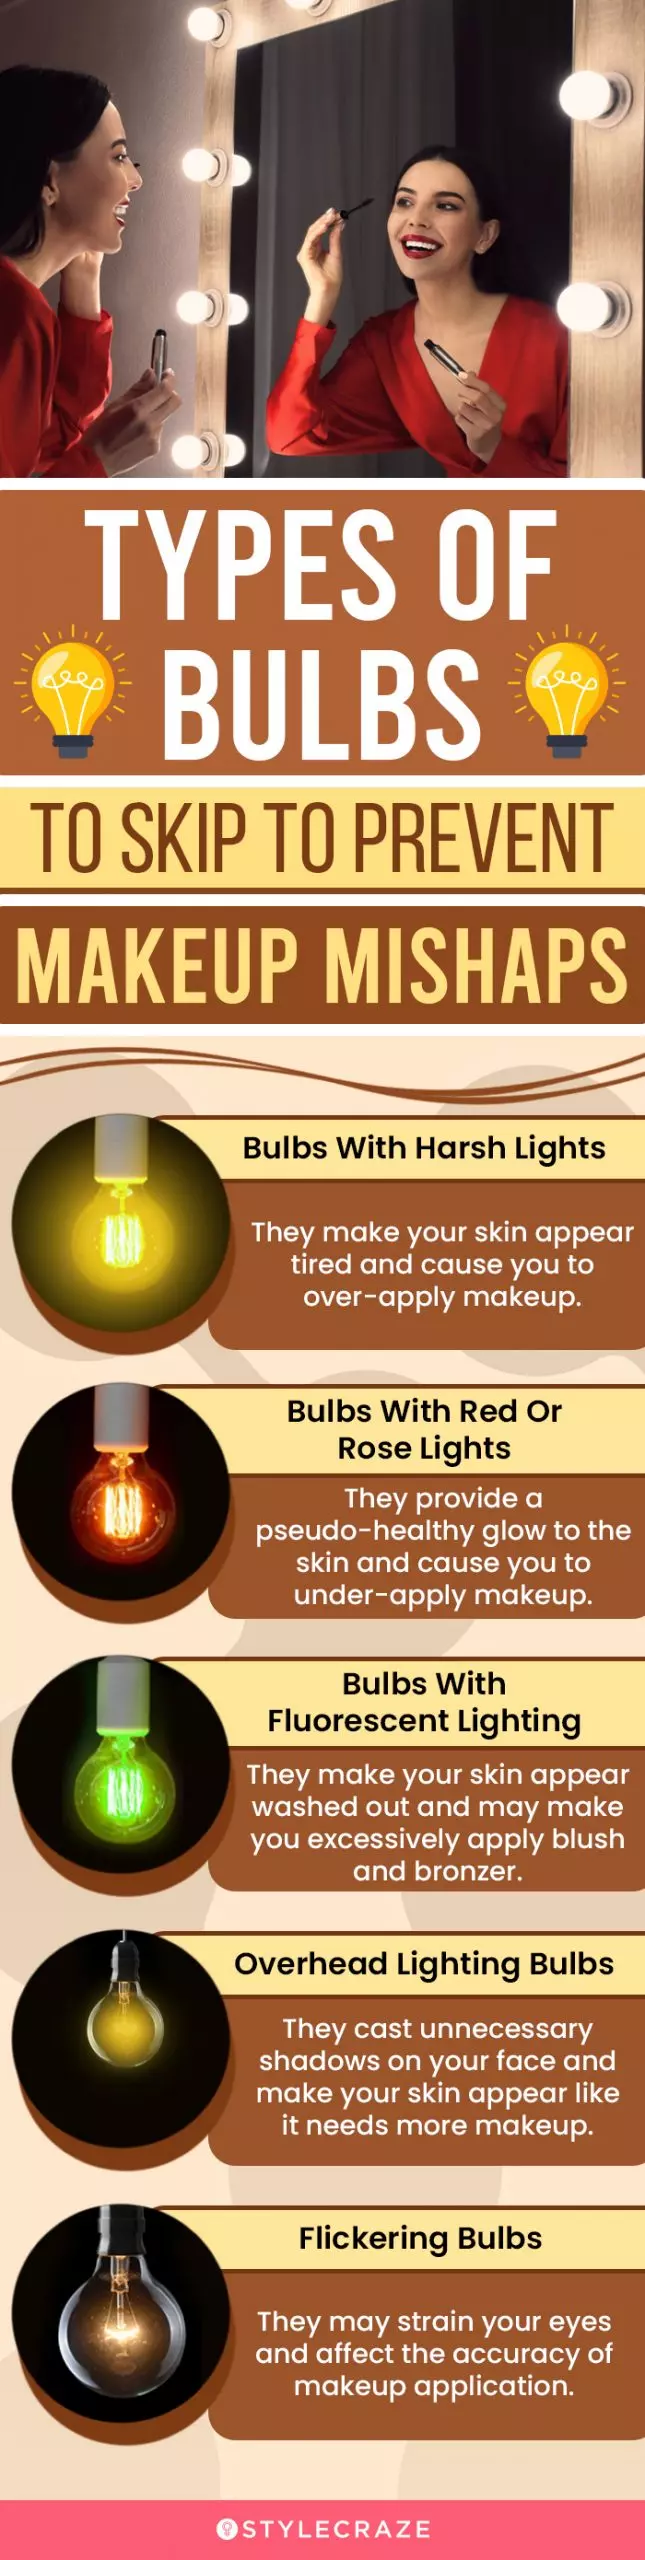 Types Of Bulbs To Skip To Prevent Makeup Mishaps (infographic)